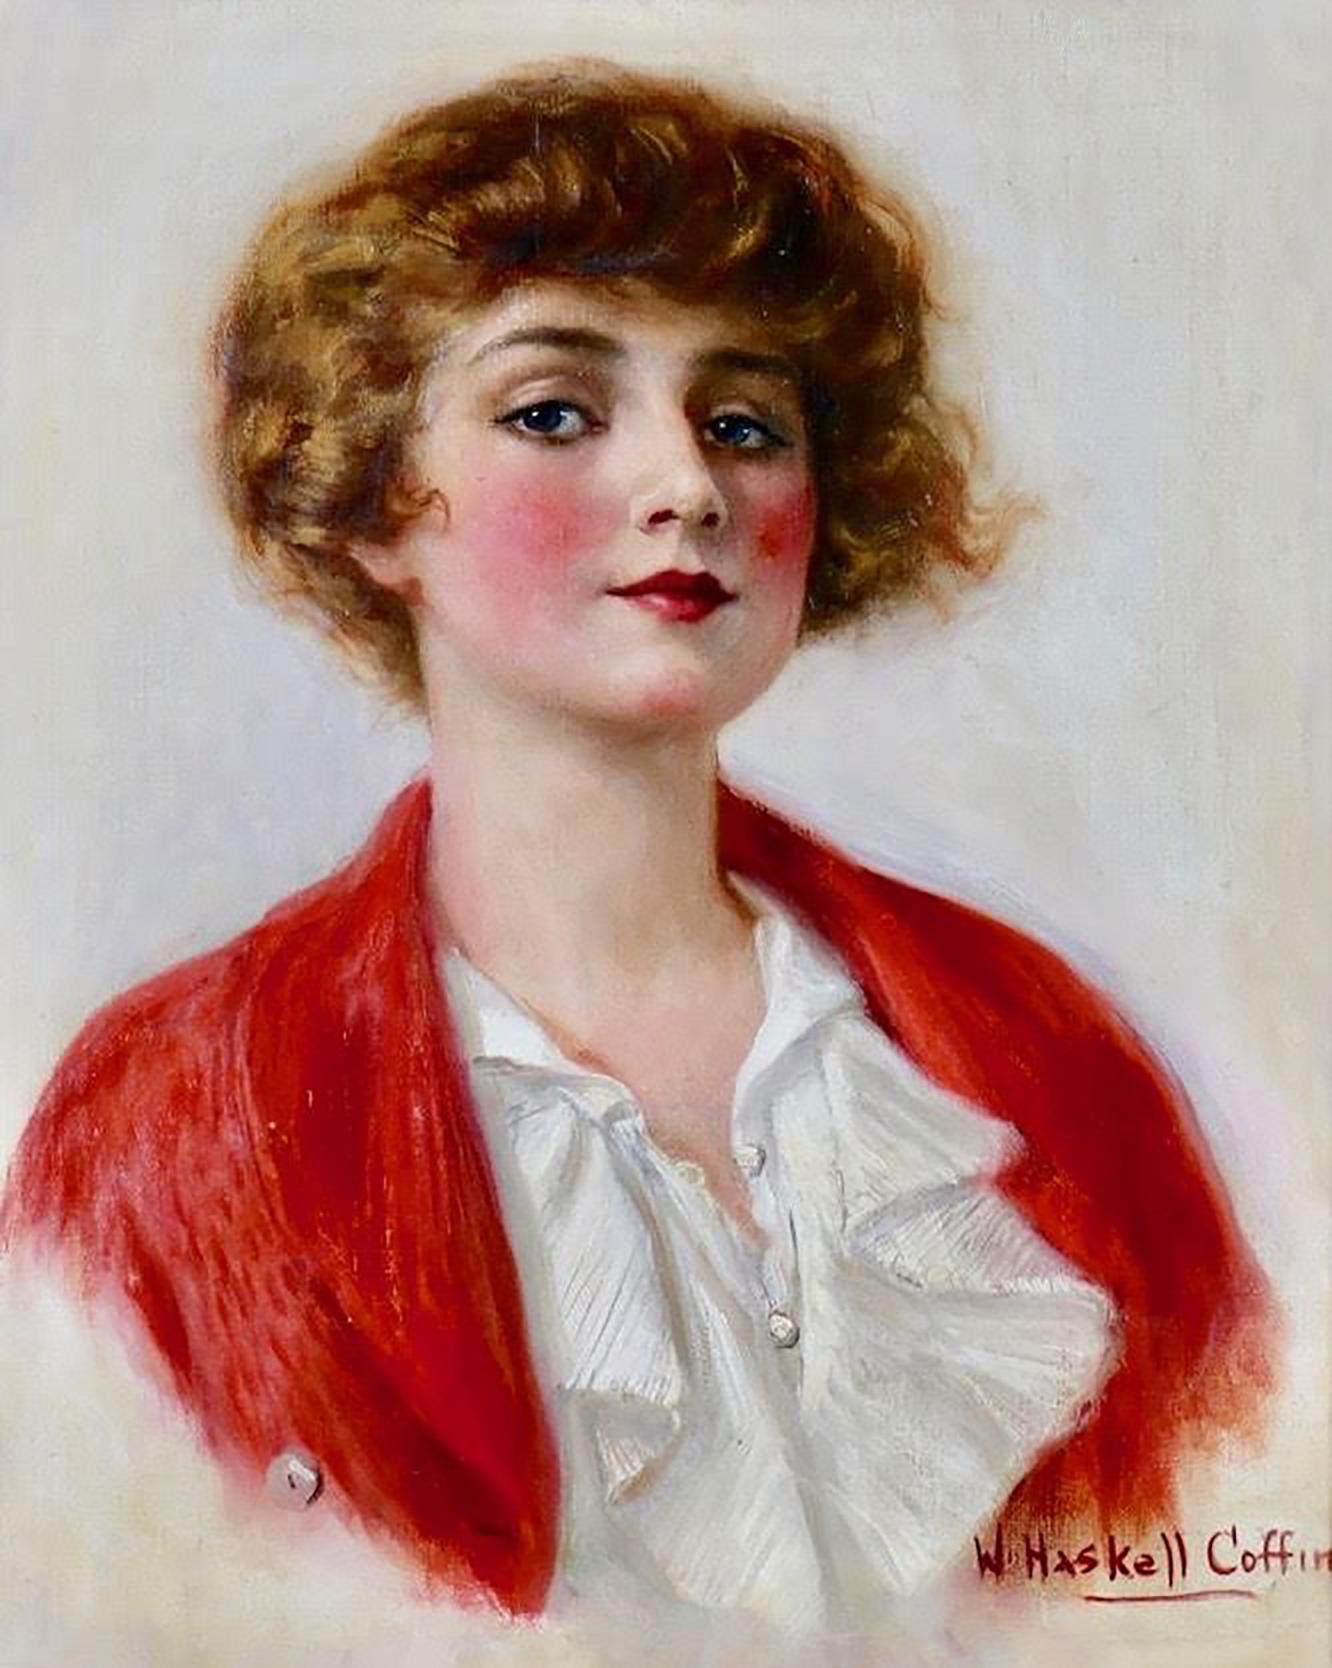 William Haskell Coffin Portrait Painting - Saturday Evening Post Cover, October 11, 1913